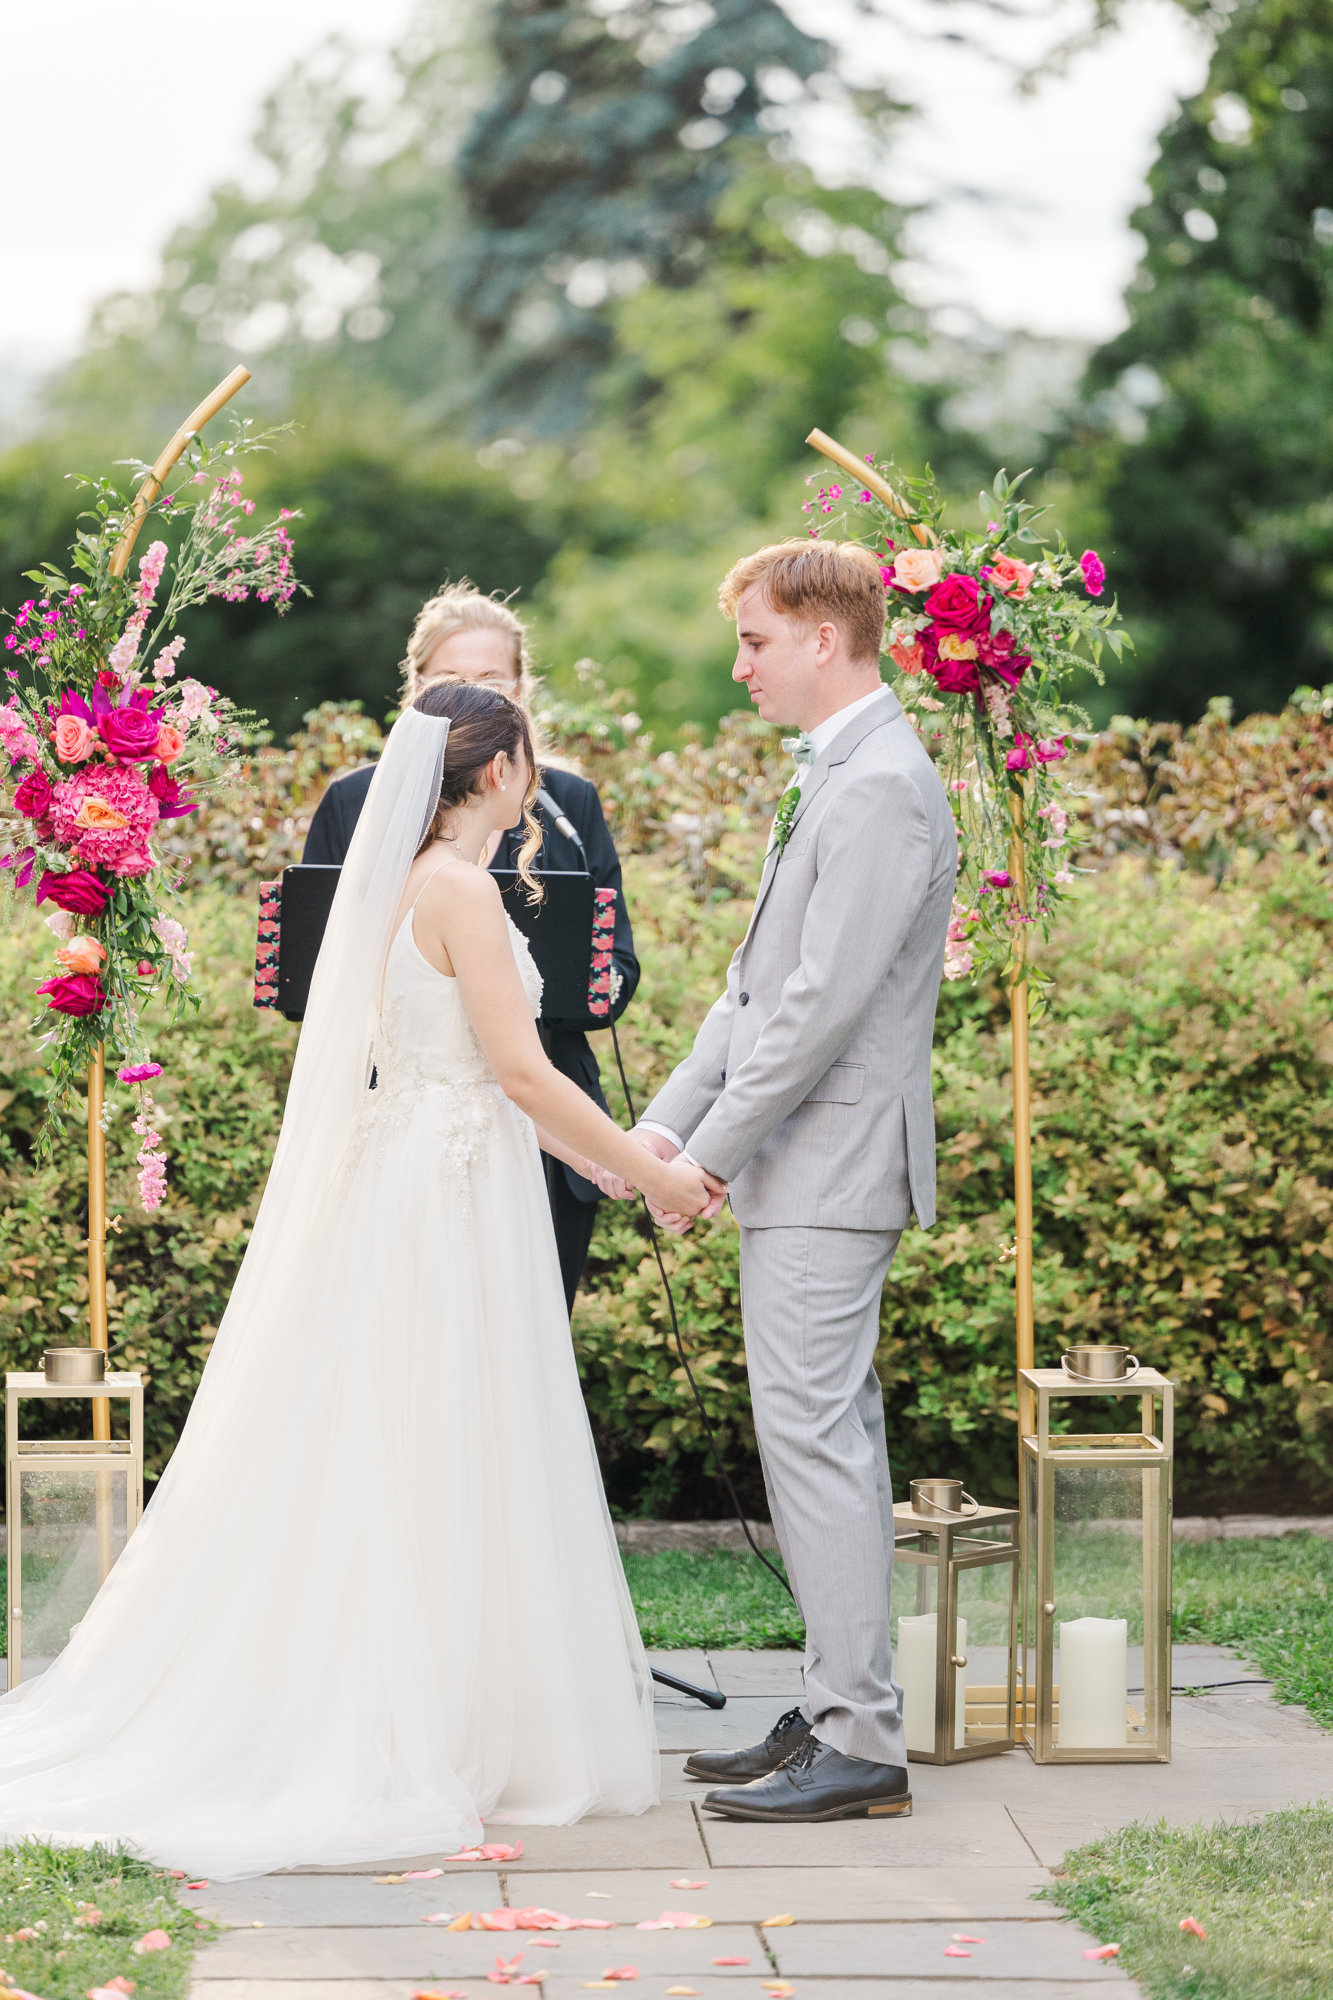 Sensational Wedding at Briarcliff Manor in Summertime